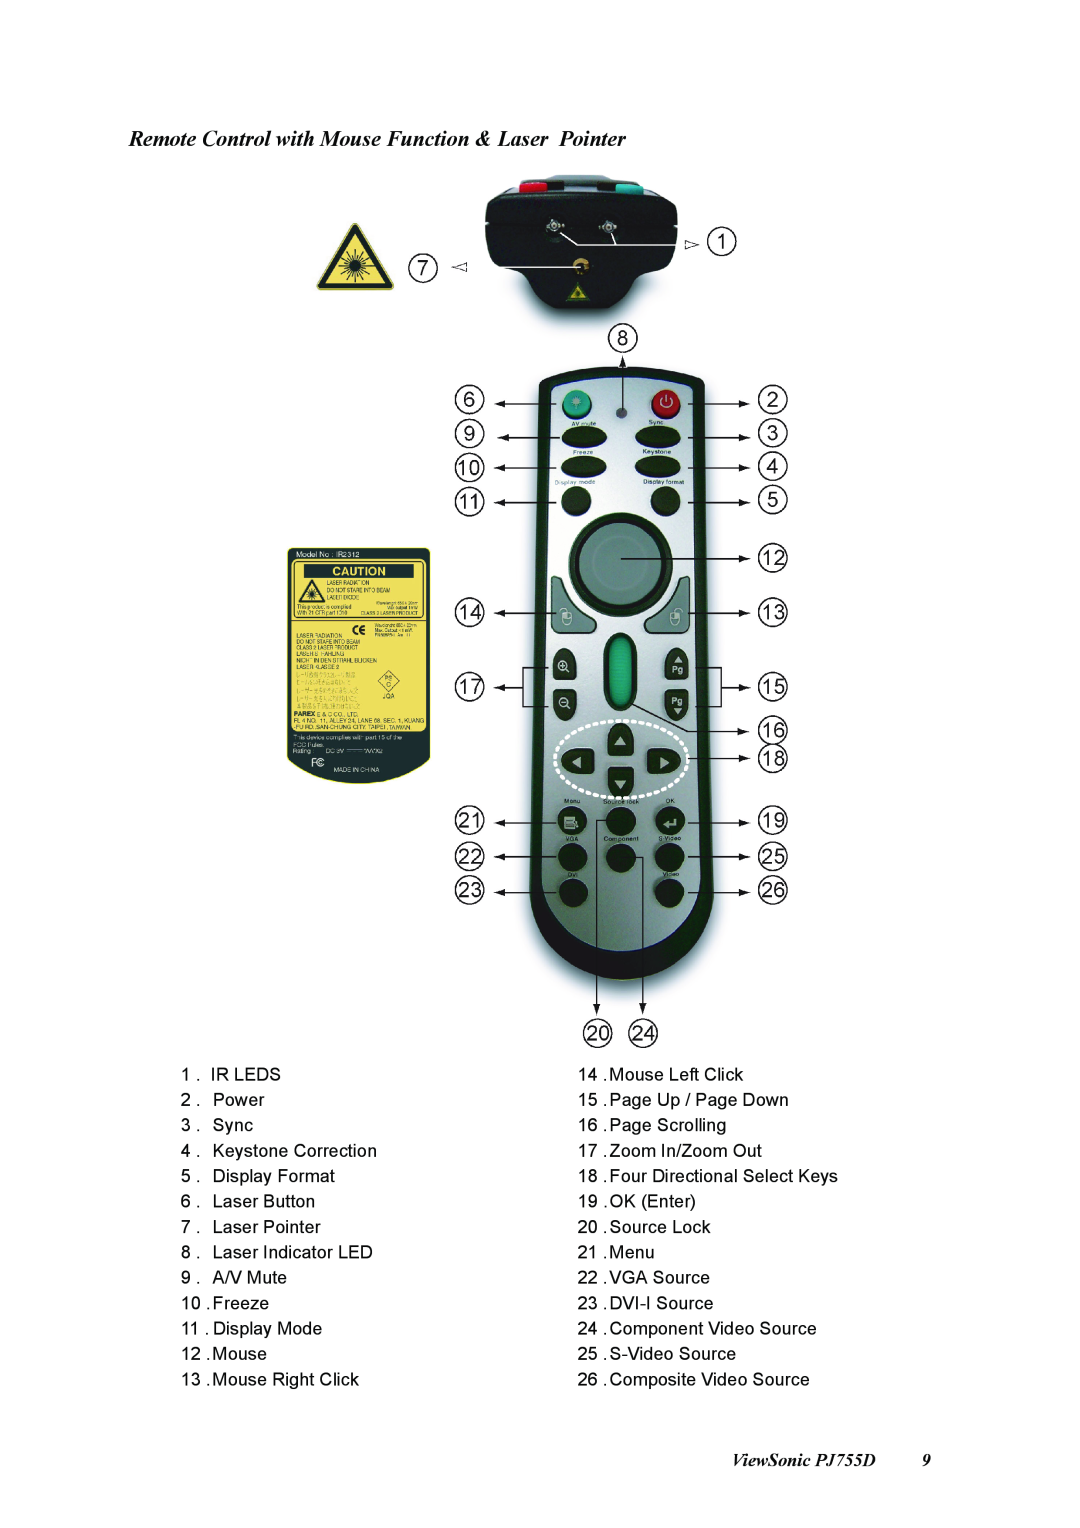 ViewSonic manual Remote Control with Mouse Function & Laser Pointer, ViewSonic PJ755D 